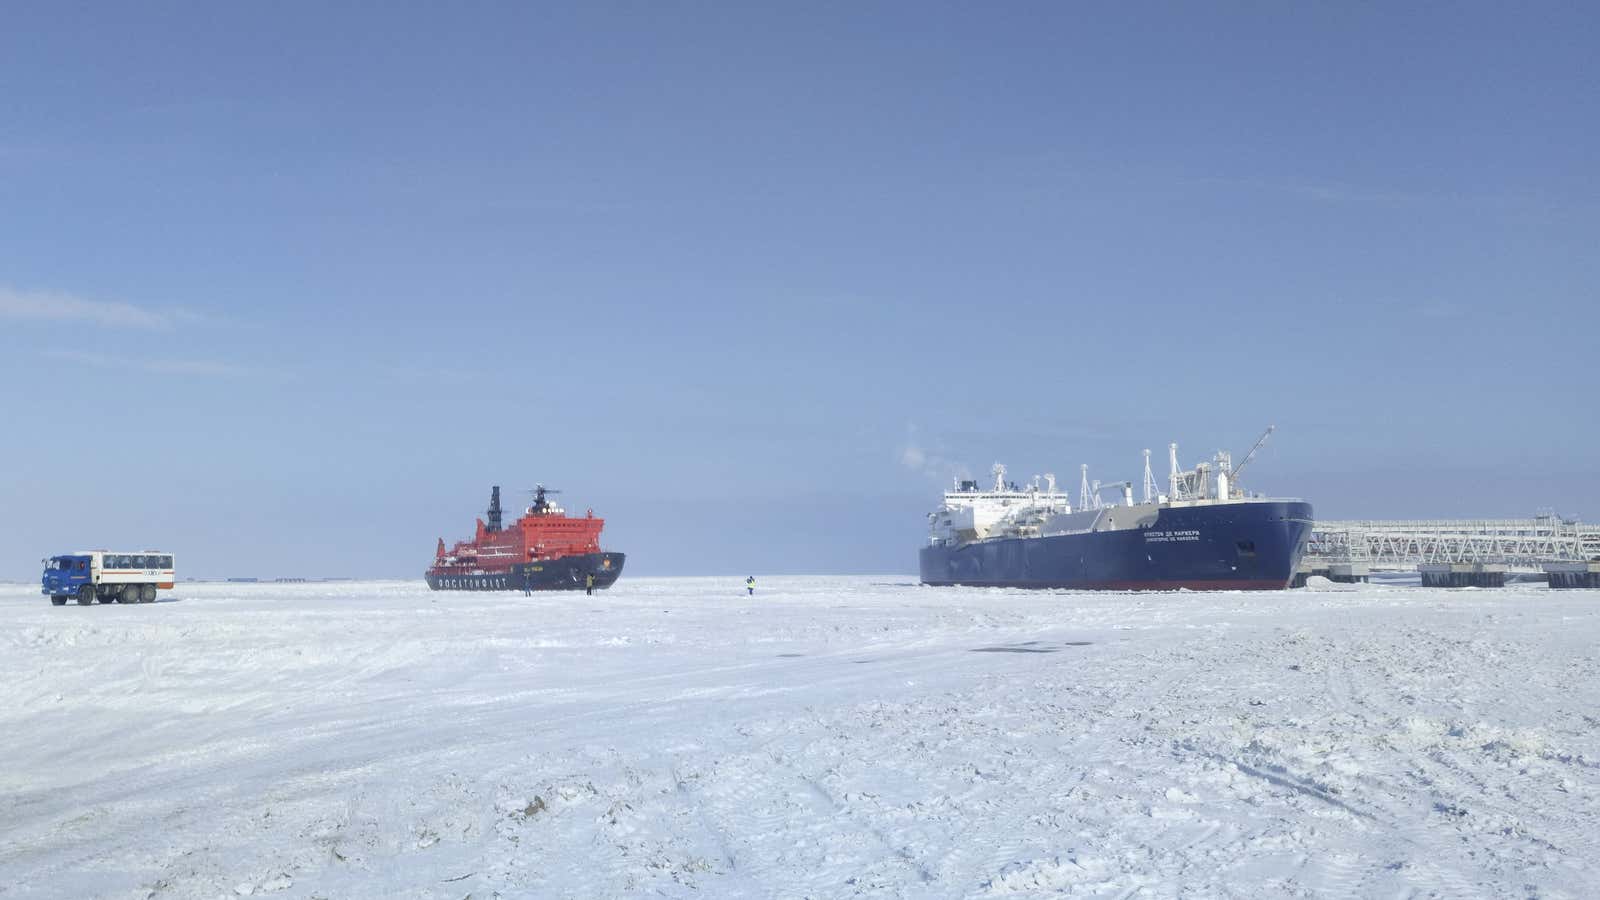 Russian ships are transporting a record amount of natural gas through the melting Northeast Passage.